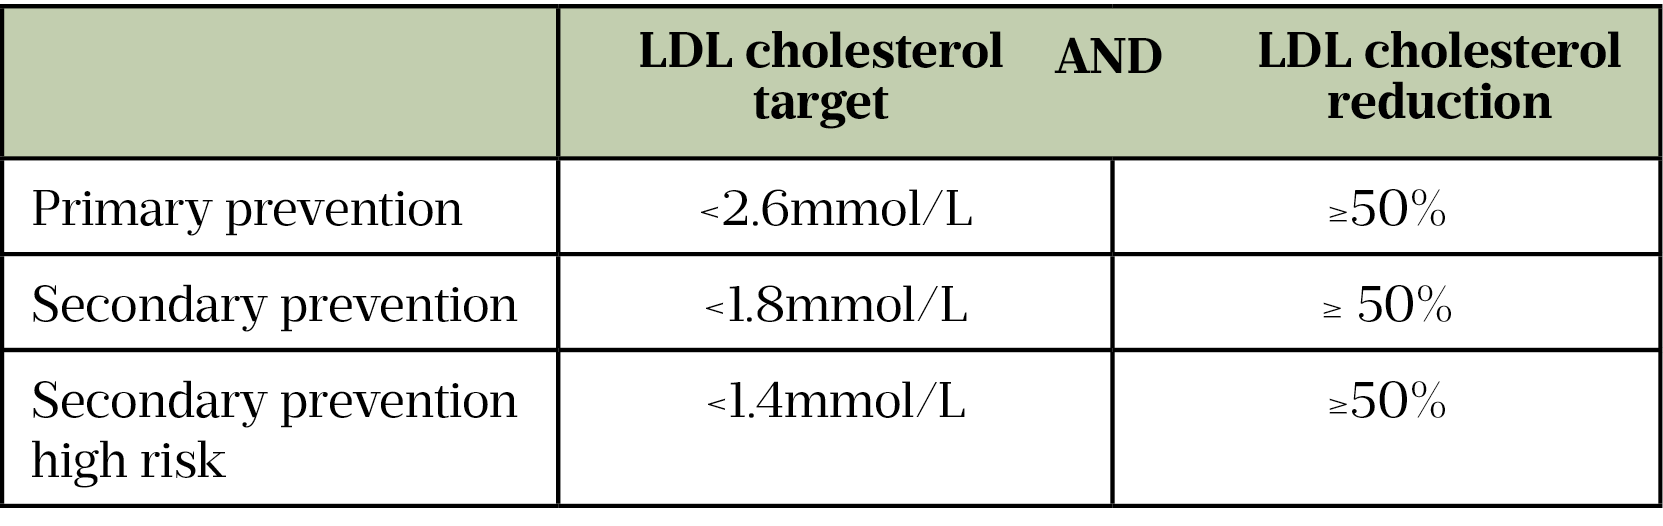 Table 4: European Society of Cardiology guideline low-density lipoprotein cholesterol targets for adult patients with familial hypercholesterolaemia